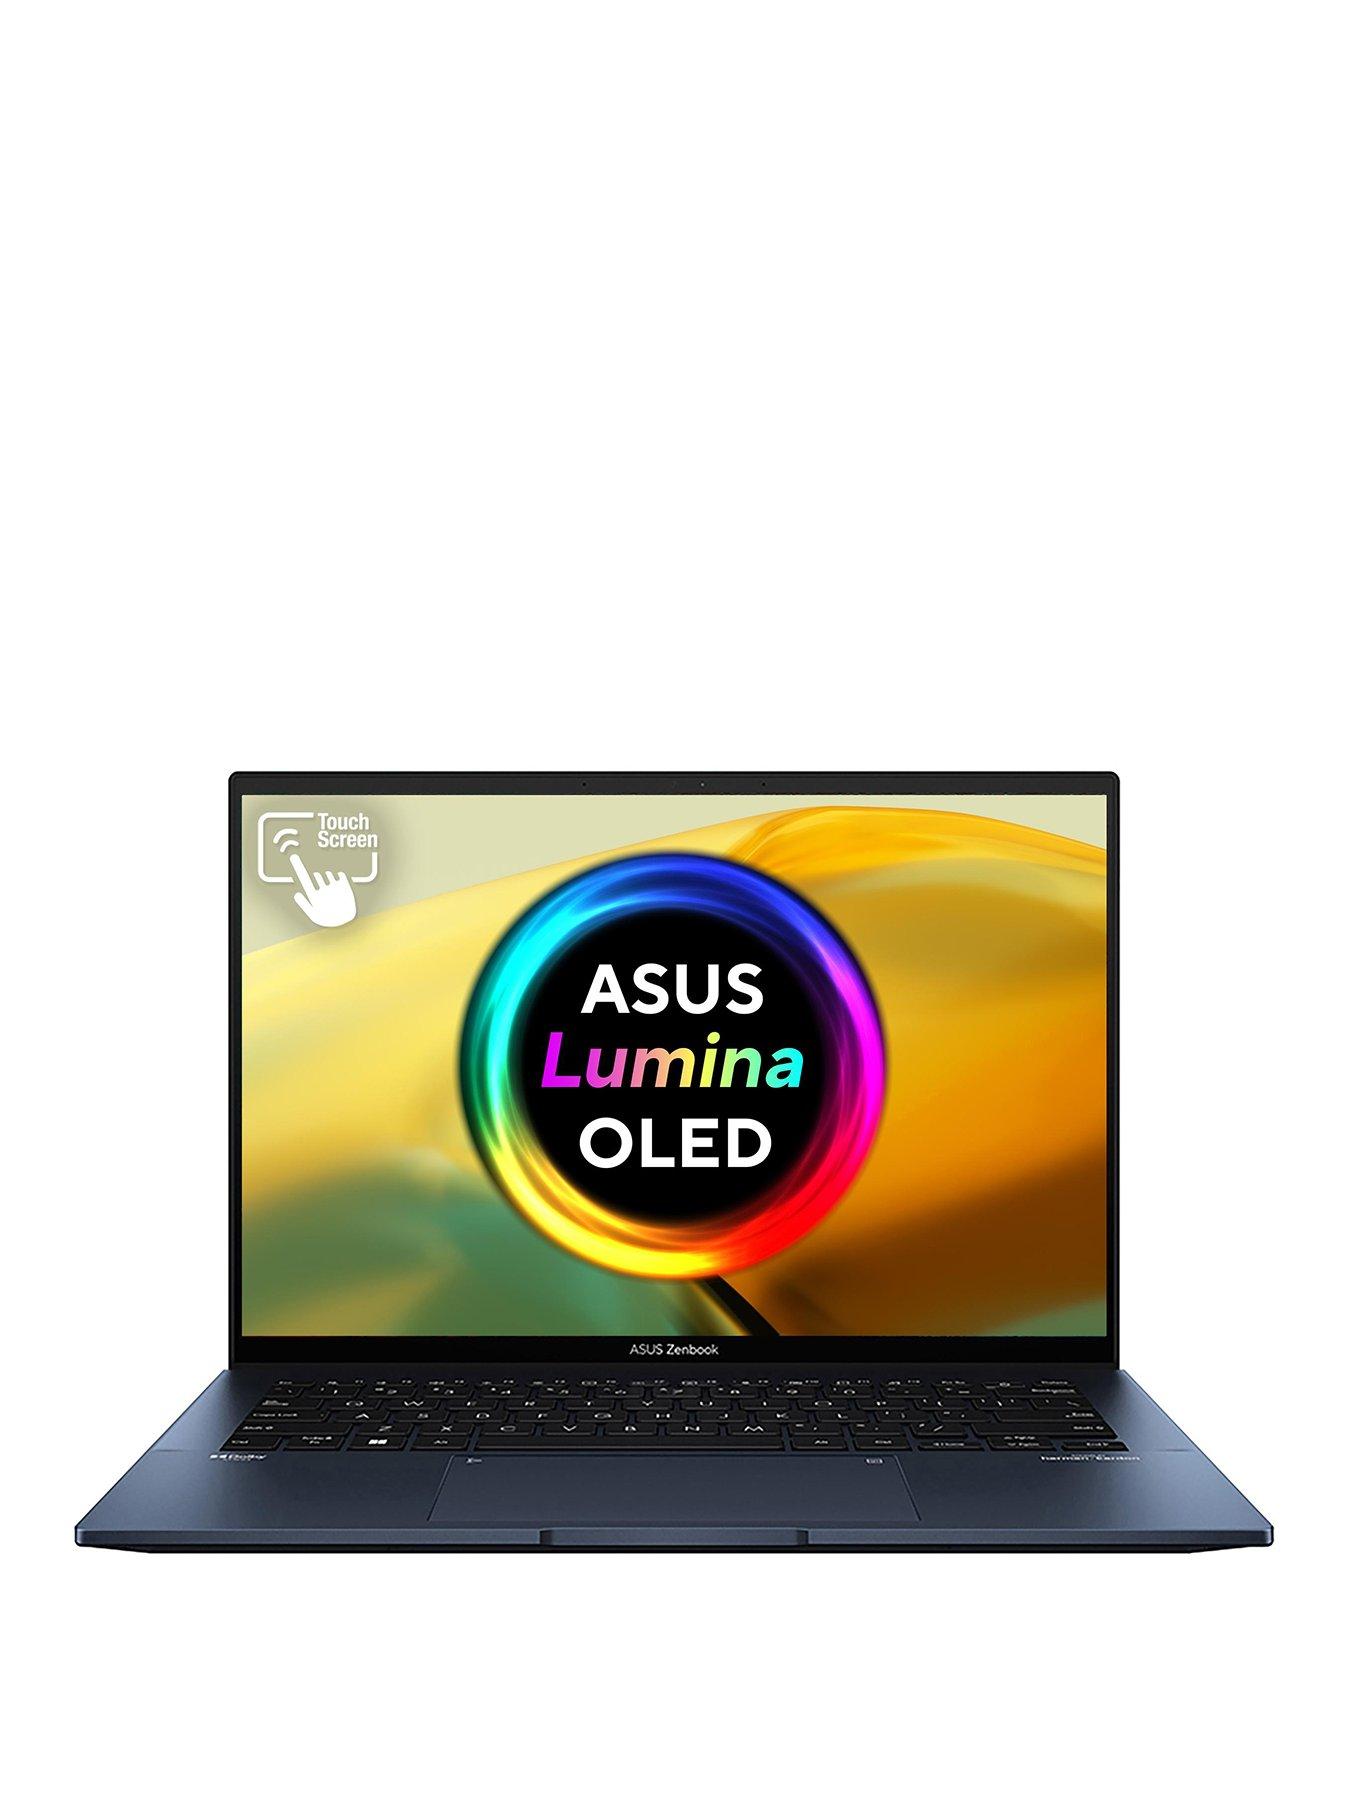 laptop-display-redefined-what-is-asus-lumina-oled